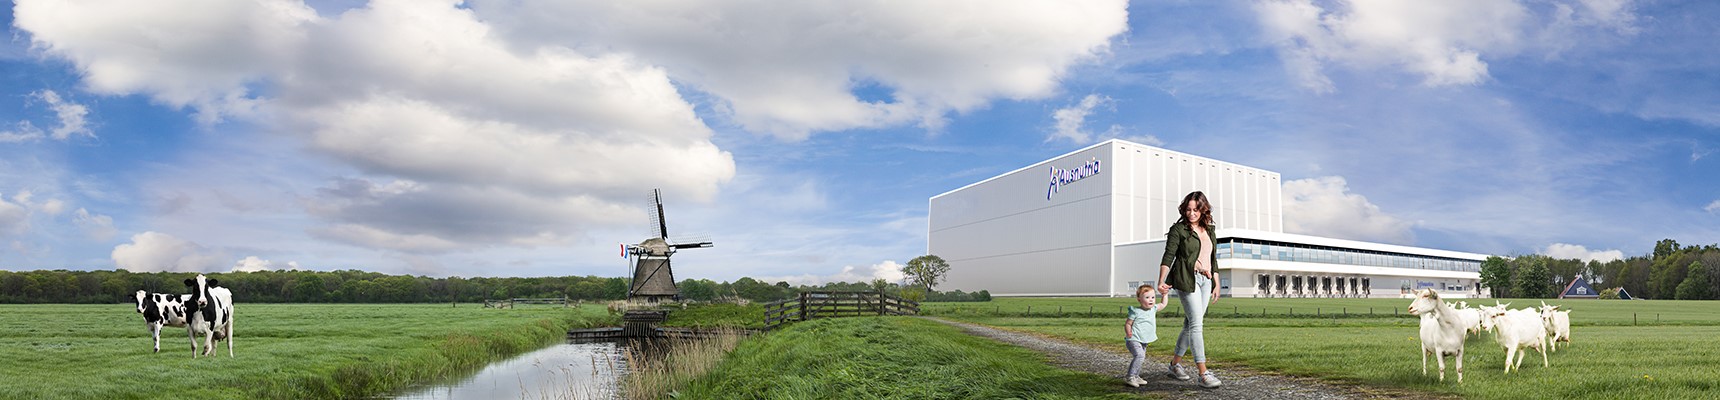 Ausnutria Netherlands over 100 years experience in dairy